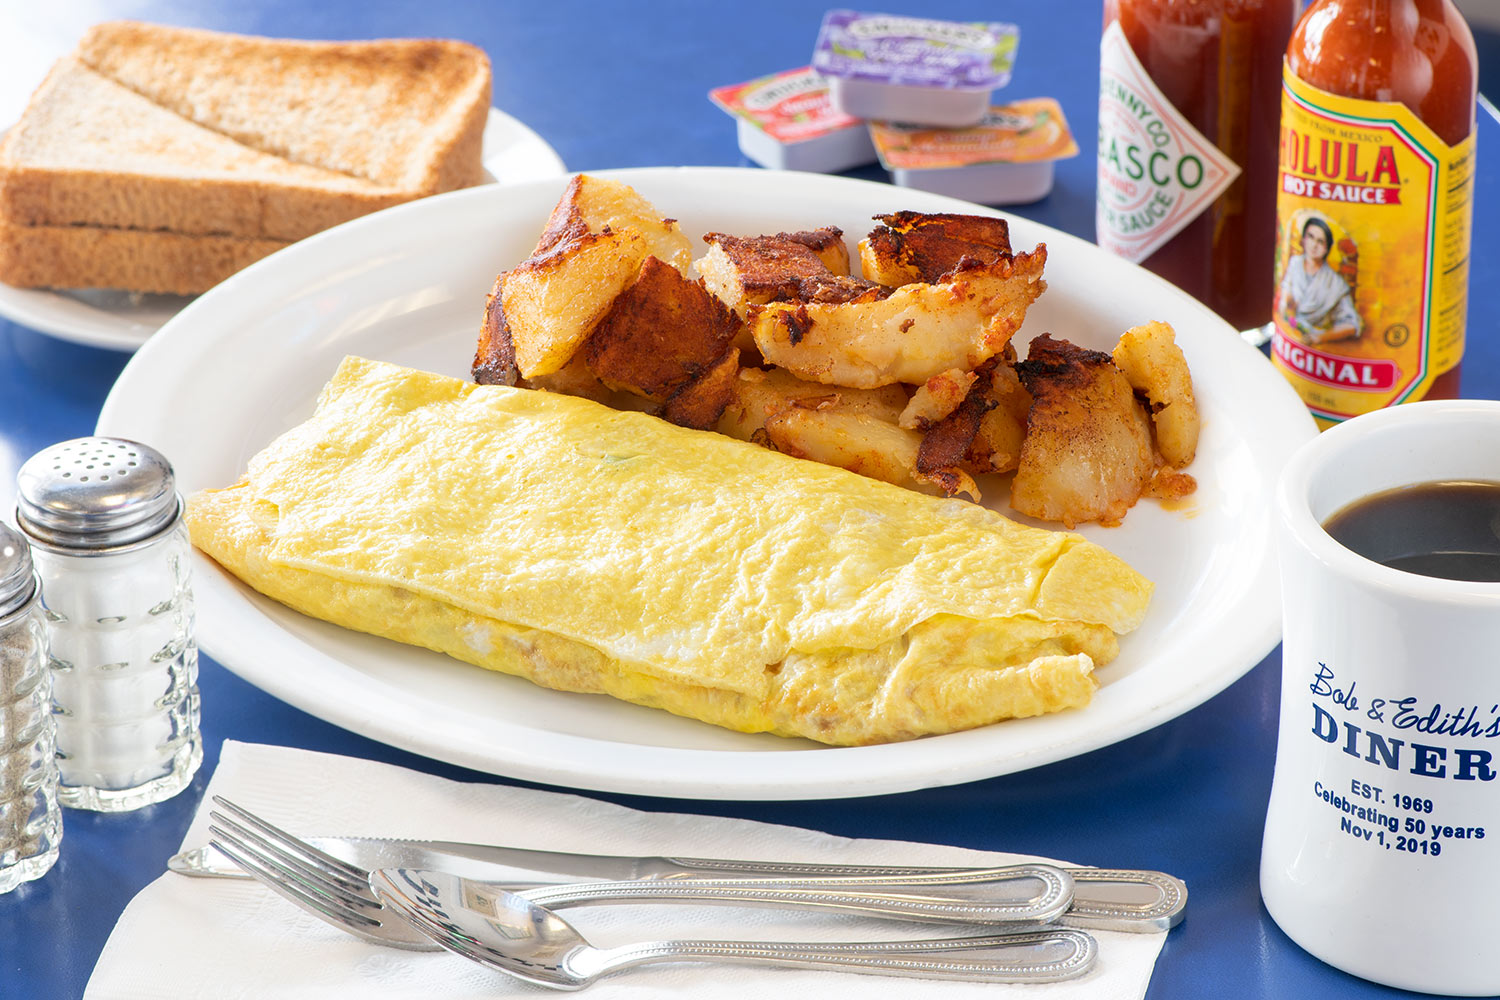 An omelet with home fries in the background, utensils in front, and coffee on the side.